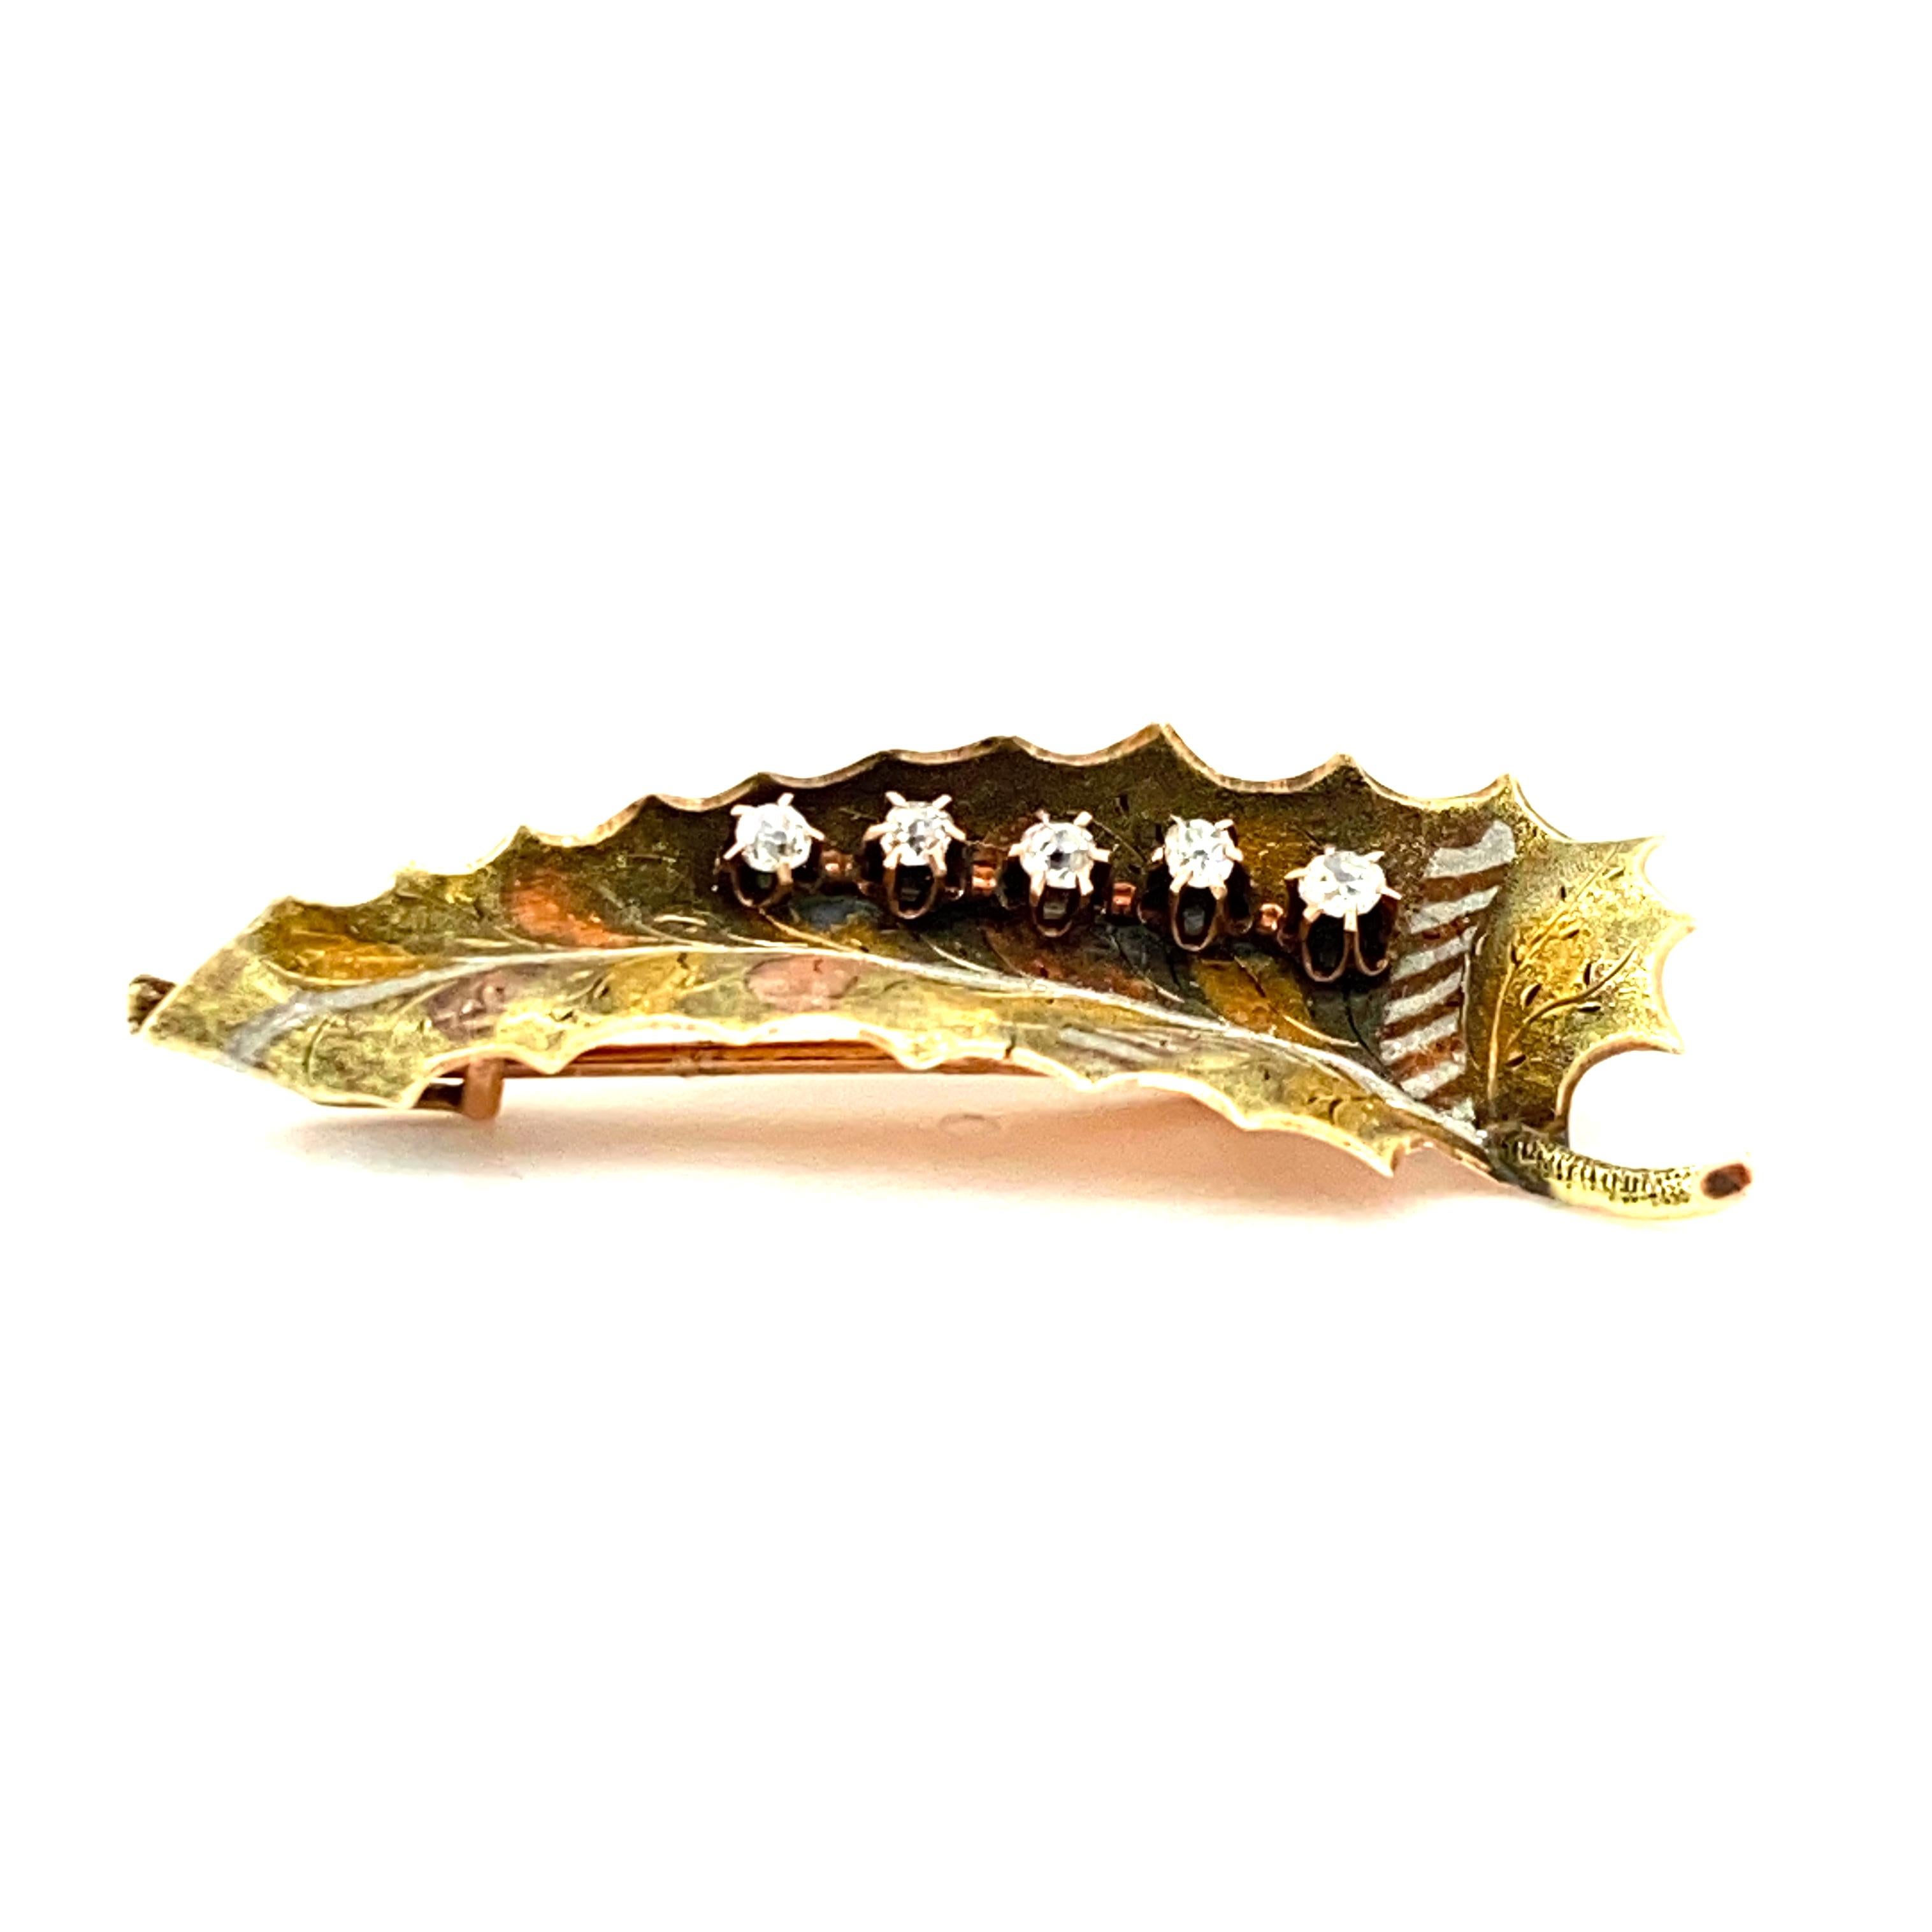 This hand-crafted multi-tone gold leaf-motif brooch uses the mixed metals technique practiced in turn-of-the-century Newark, New Jersey - back when Newark was a center of the jewelry industry with craftsmanship rivaling that of fine French and